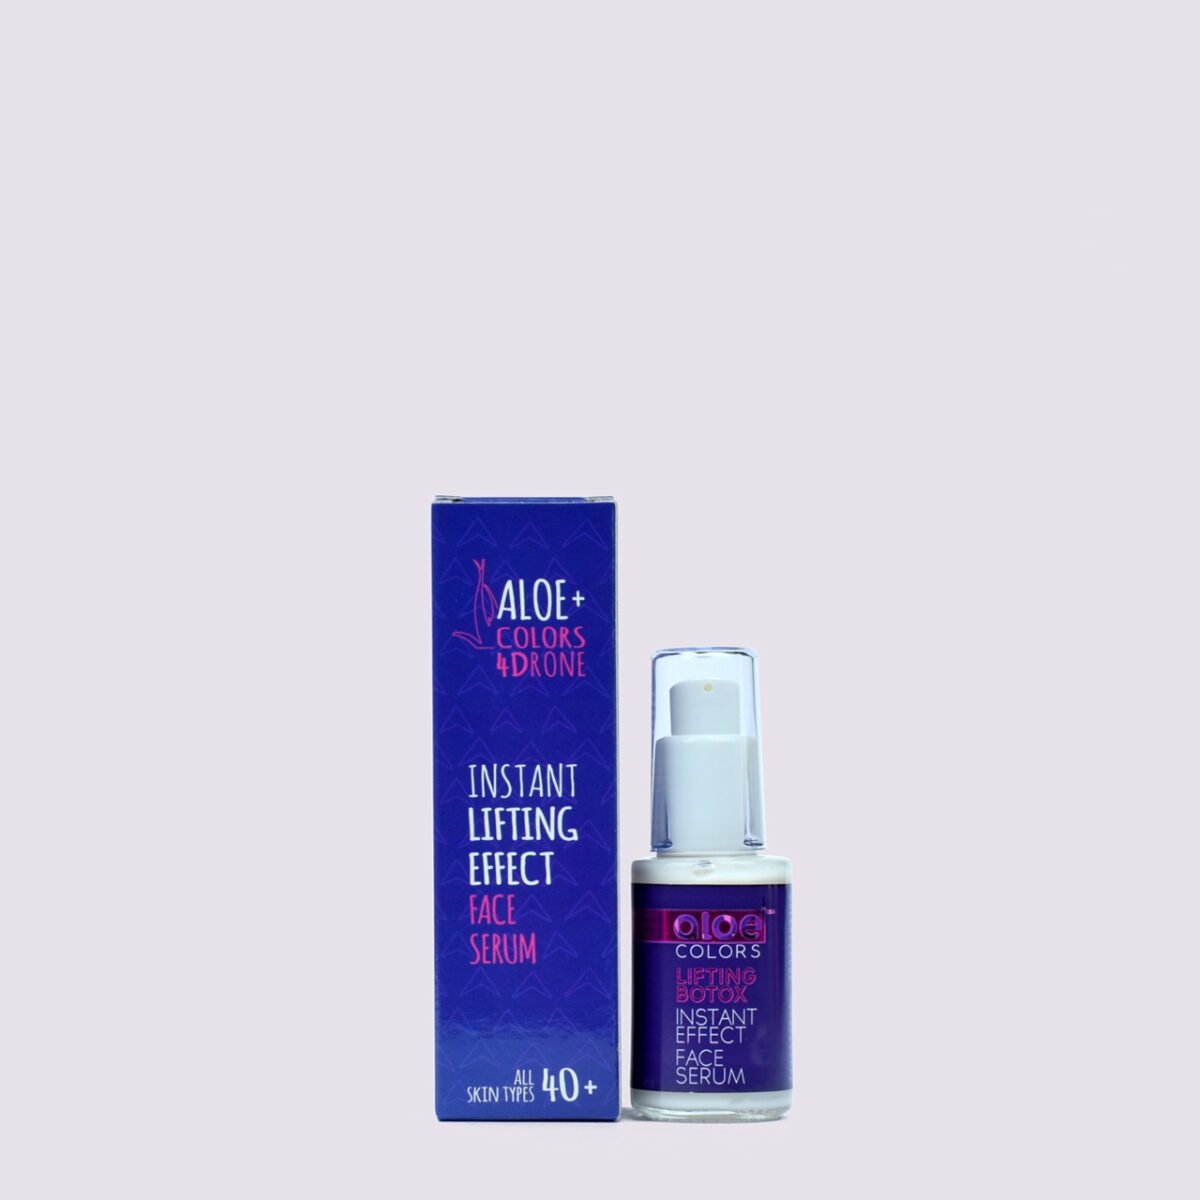 aloe-colors-instant-lifting-effect-face-serum-30ml-mamaspharmacy-4